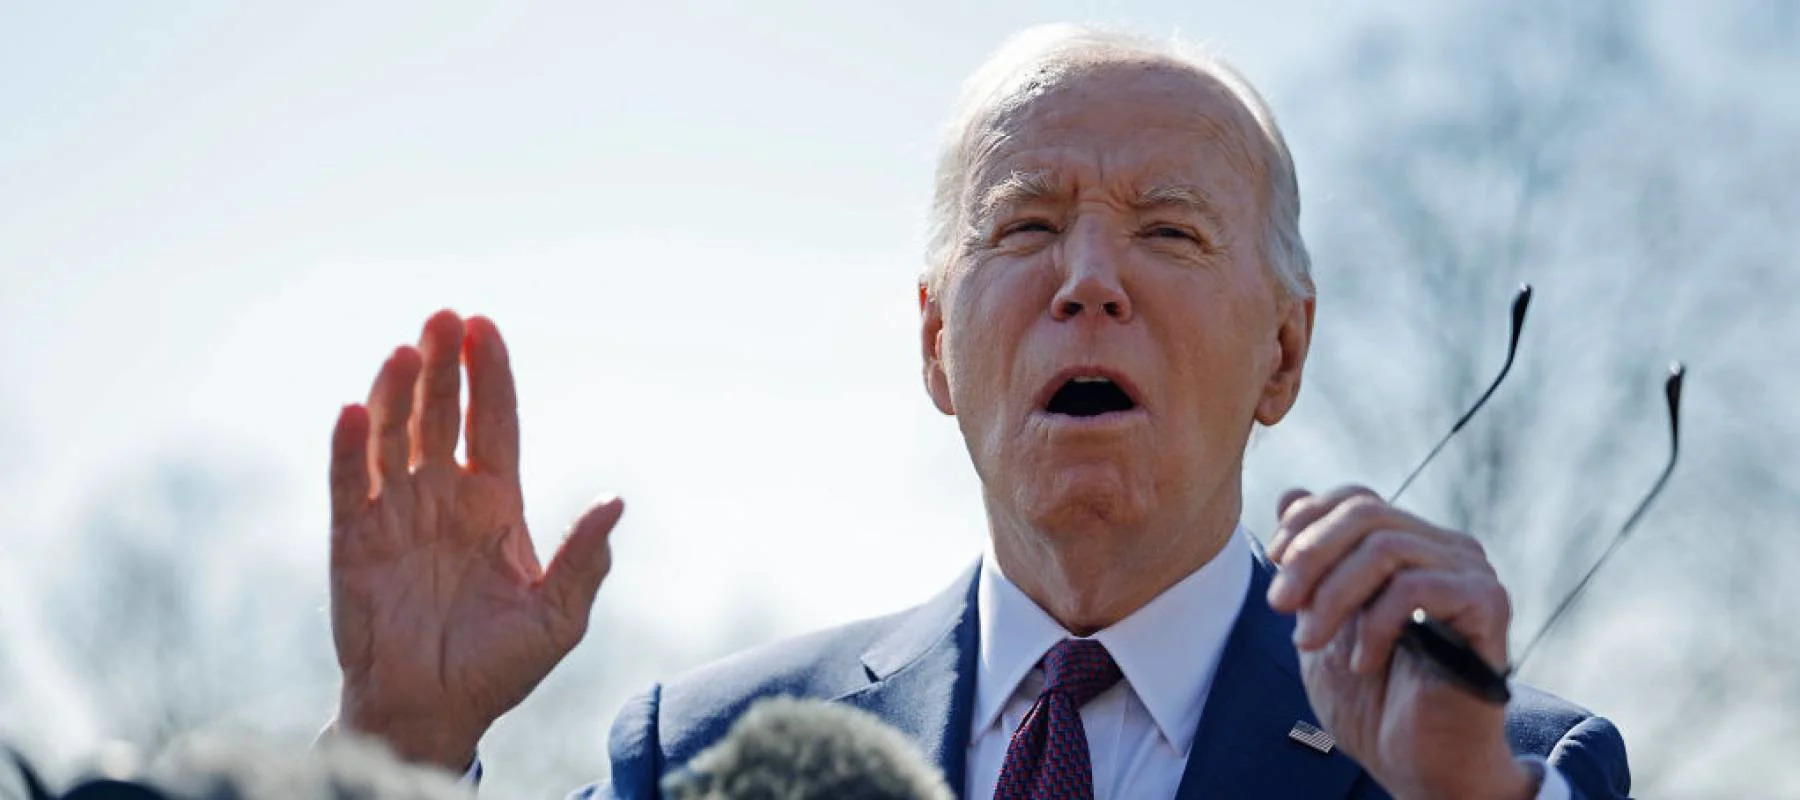 President Biden just canceled plans to refill America's emergency oil reserve — here's why and what it means